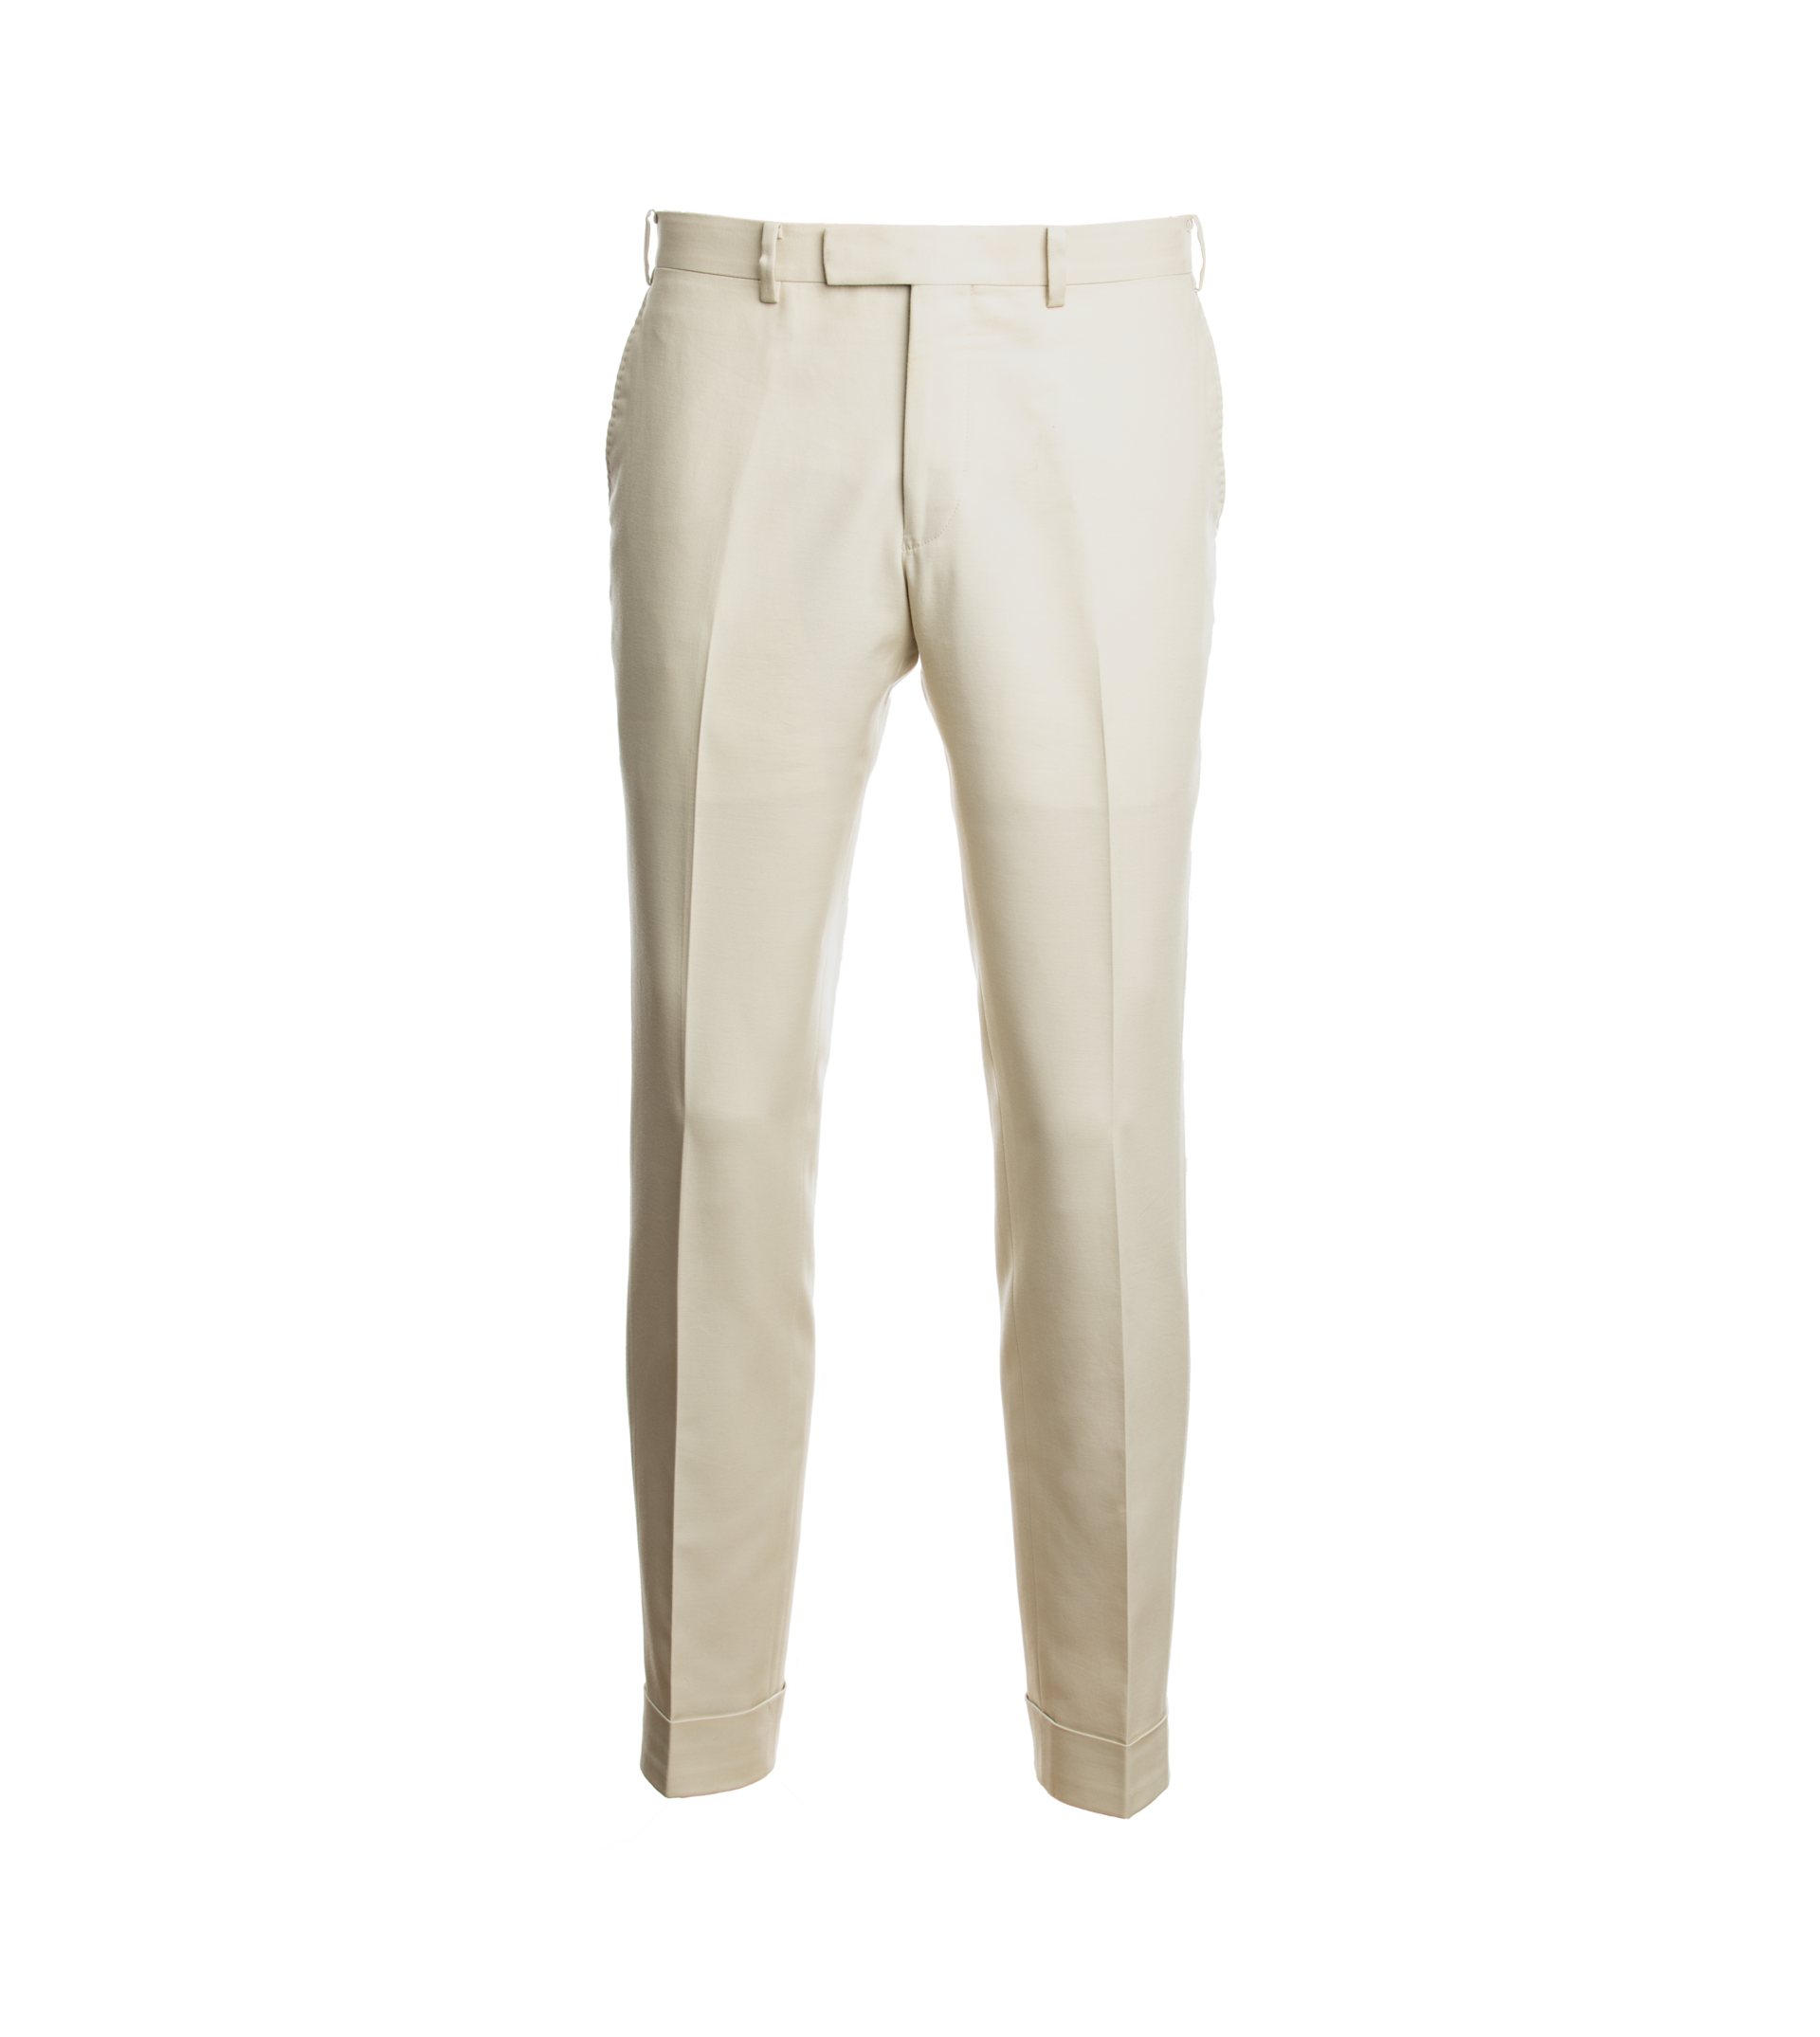 Classic Summer Style: White Chinos - He Spoke Style